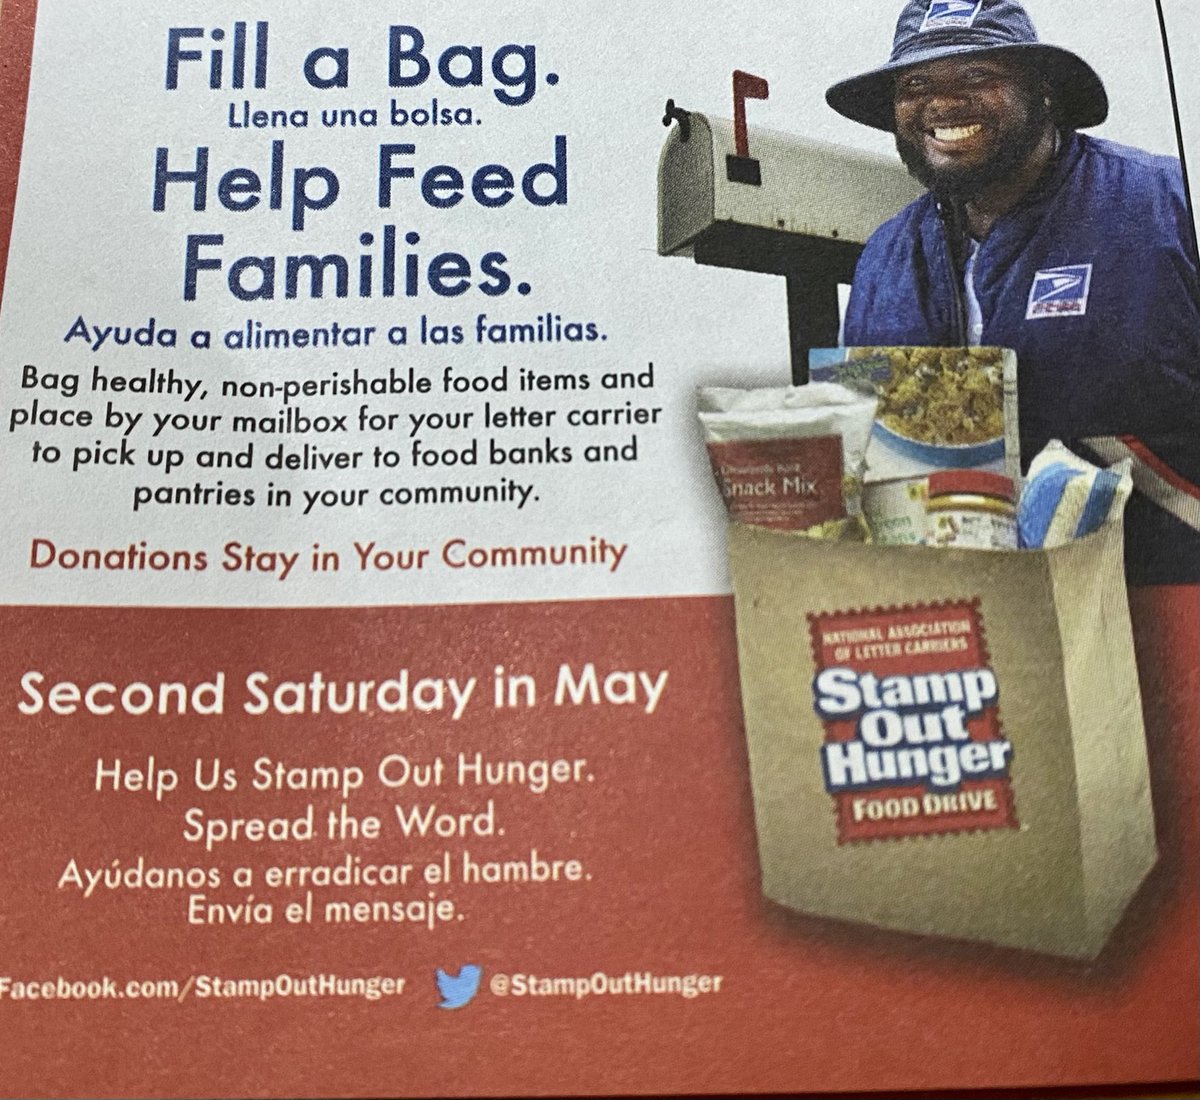 Please donate to help Stamp Out Hunger in our community. Tomorrow put out food items and your mail person will bring them to food banks serving our Broward families. Thank you!